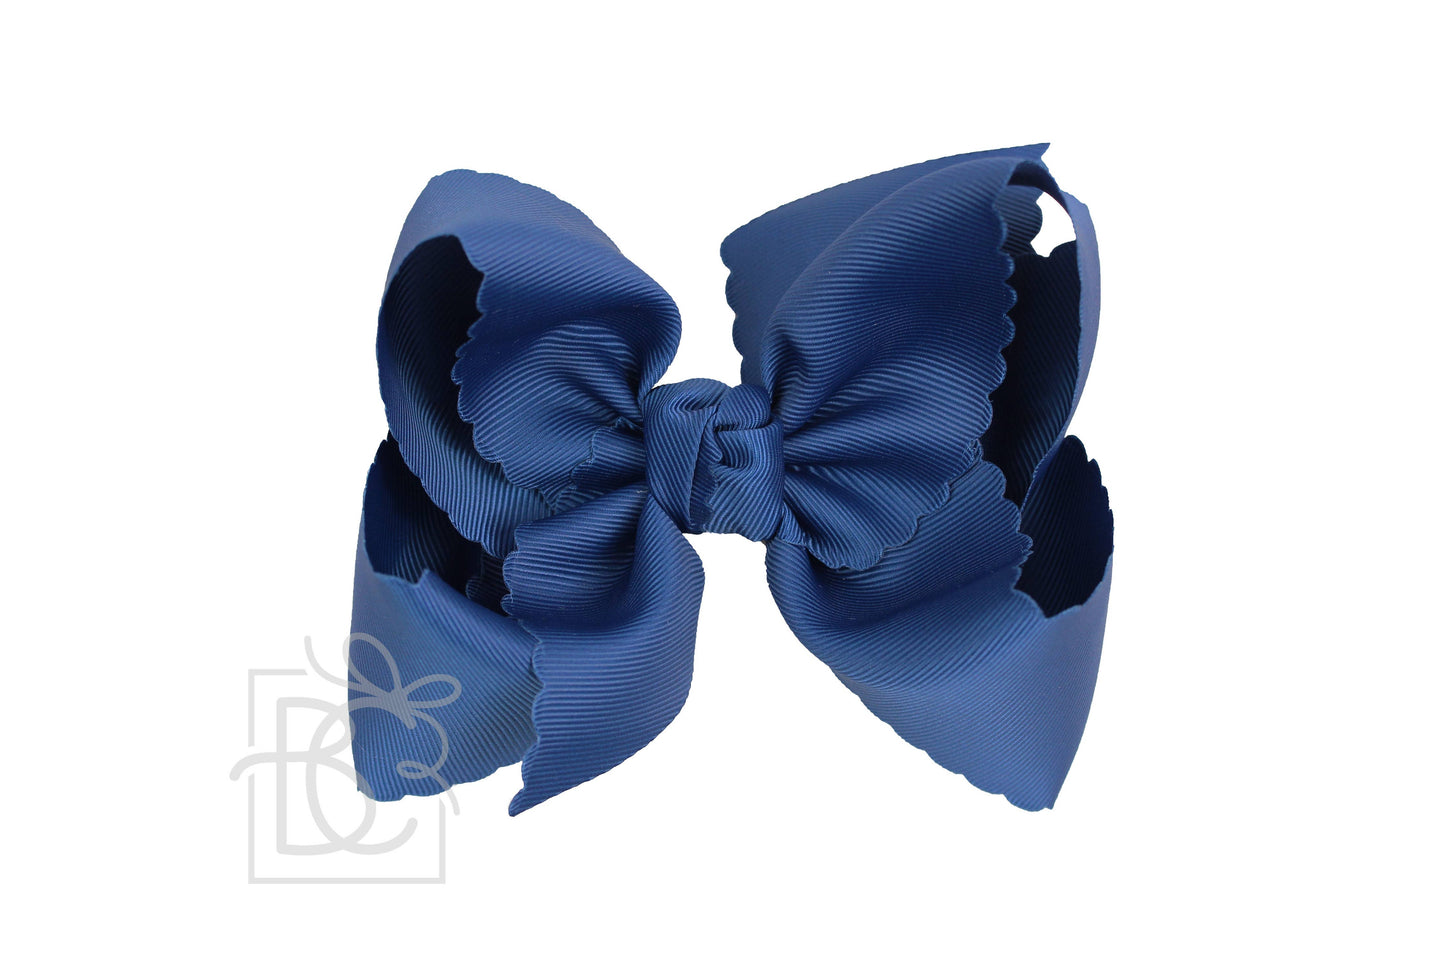 Beyond Creations 5.5” Scalloped Edge Alligator Clip Bow